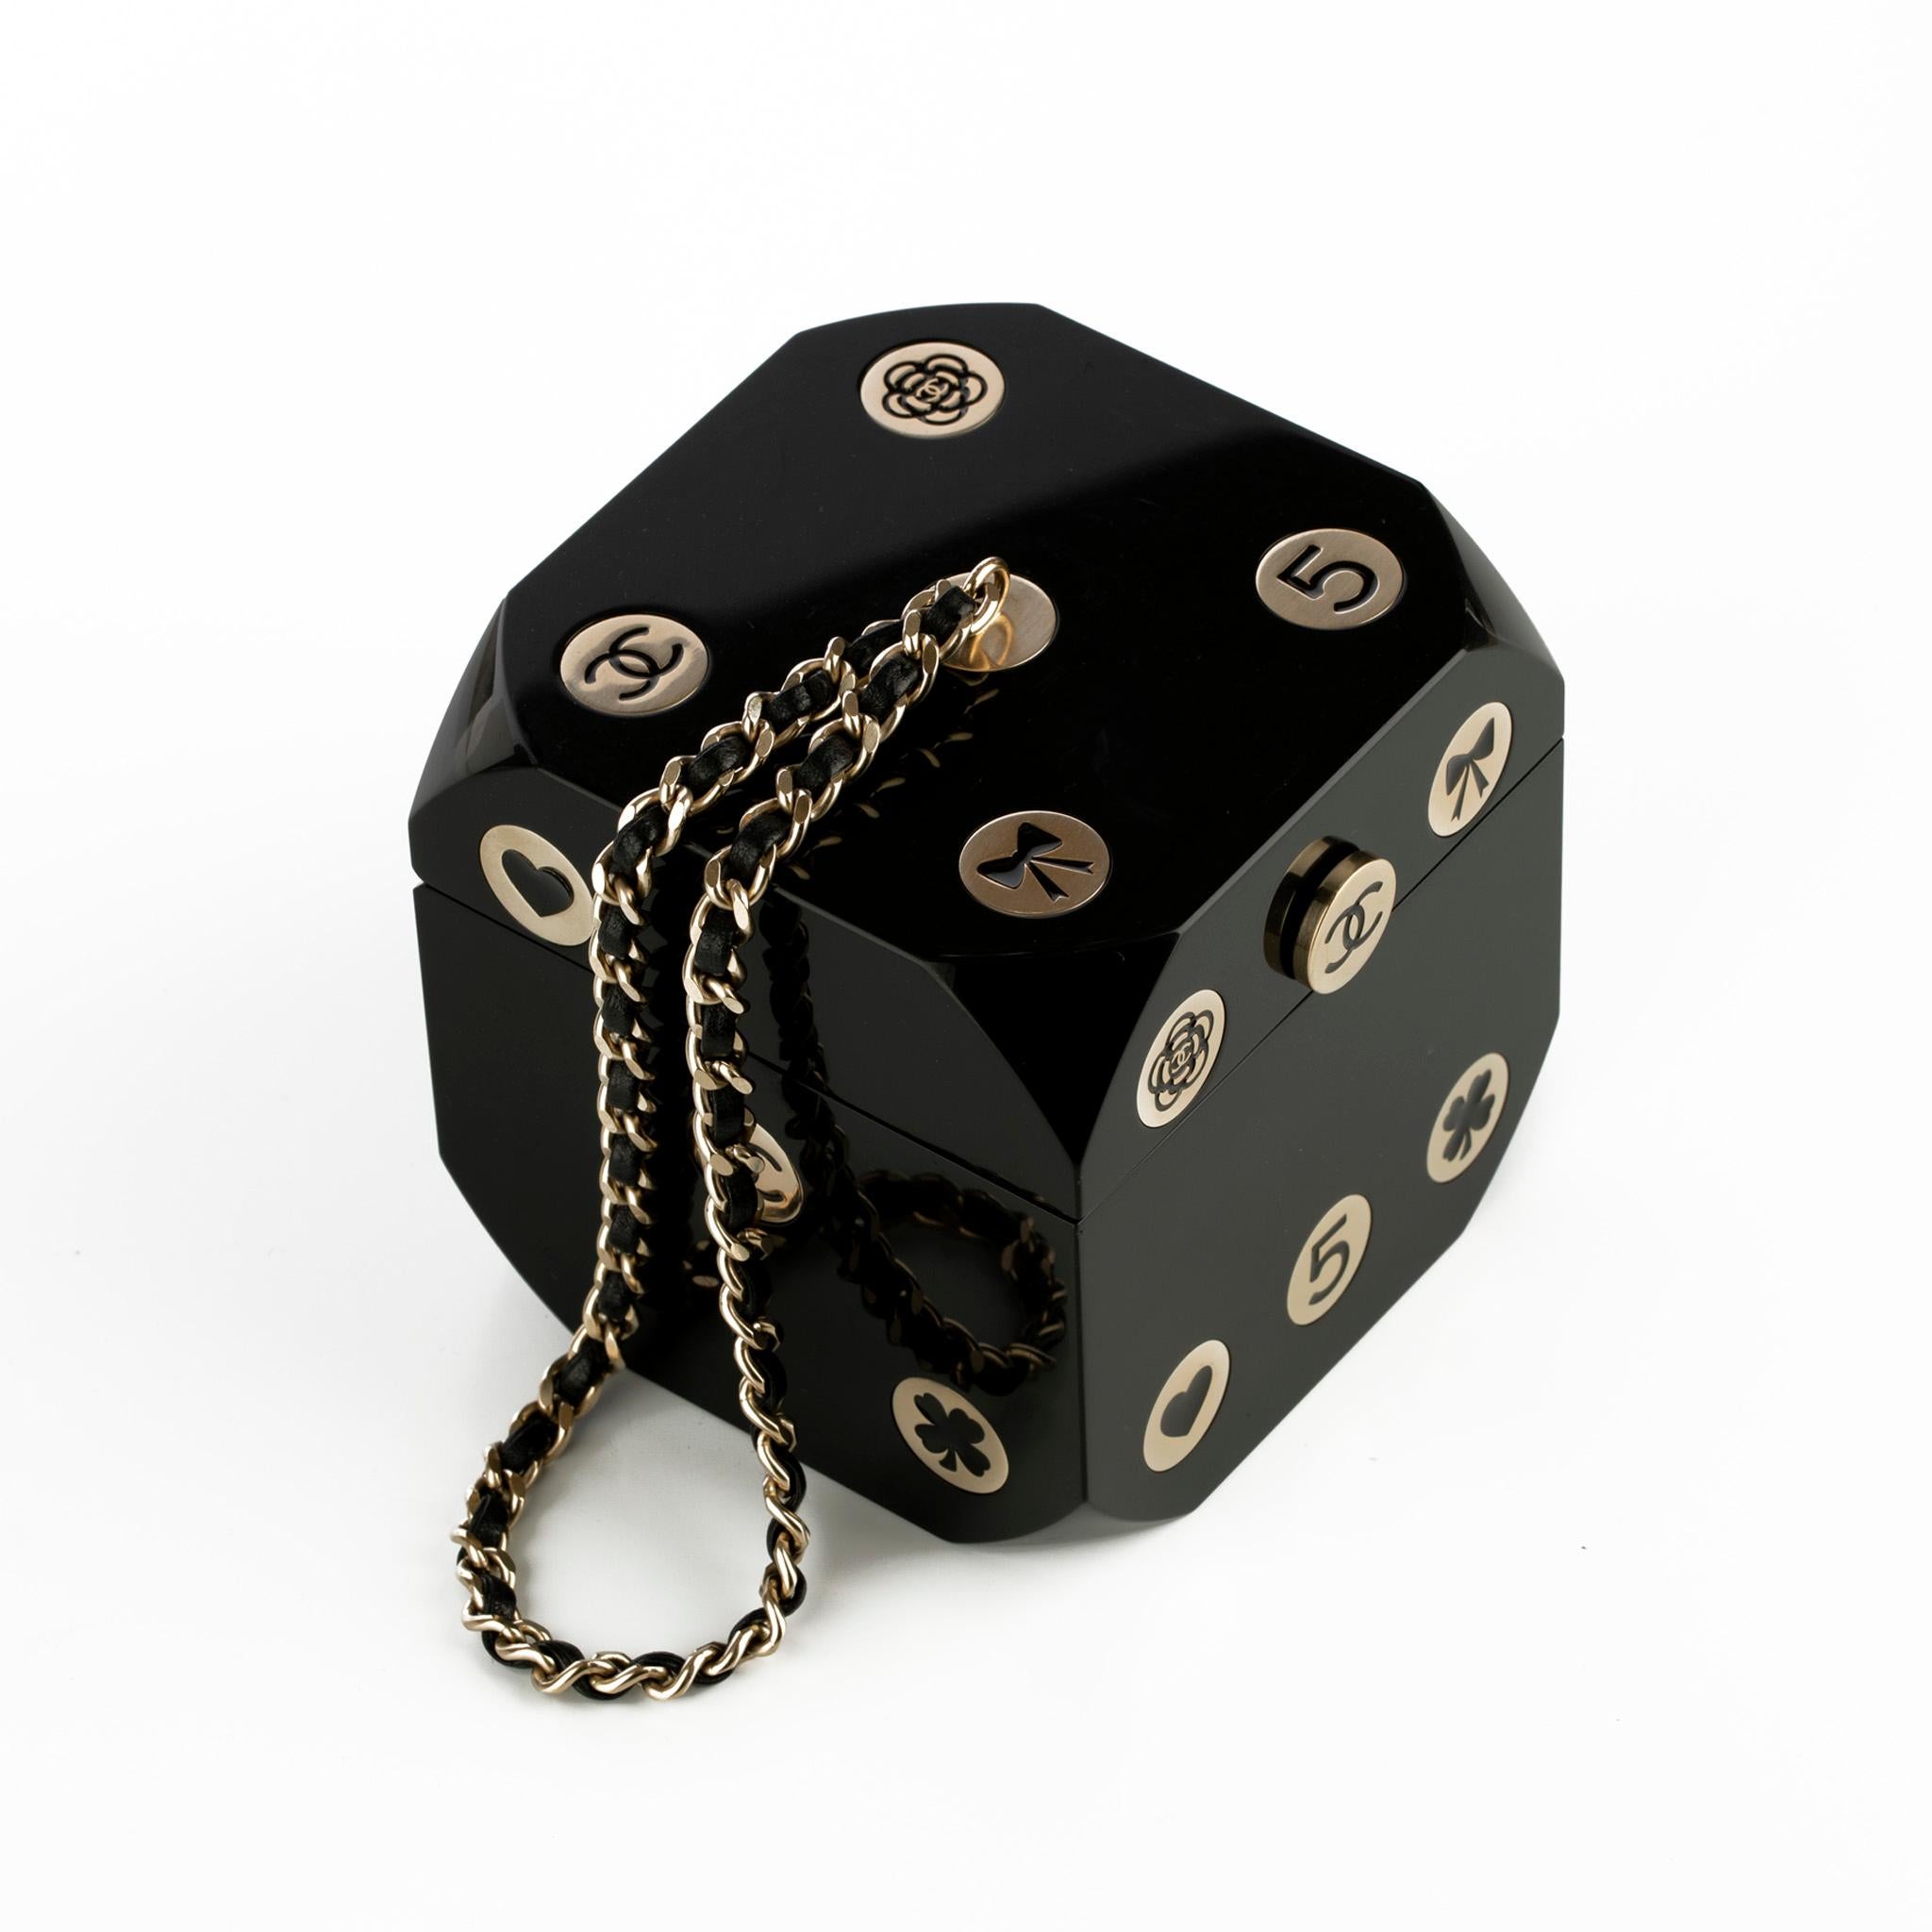 Chanel Minaudière Limited Edition Casino Dice Black Gold-Tone Hardware For Sale 1